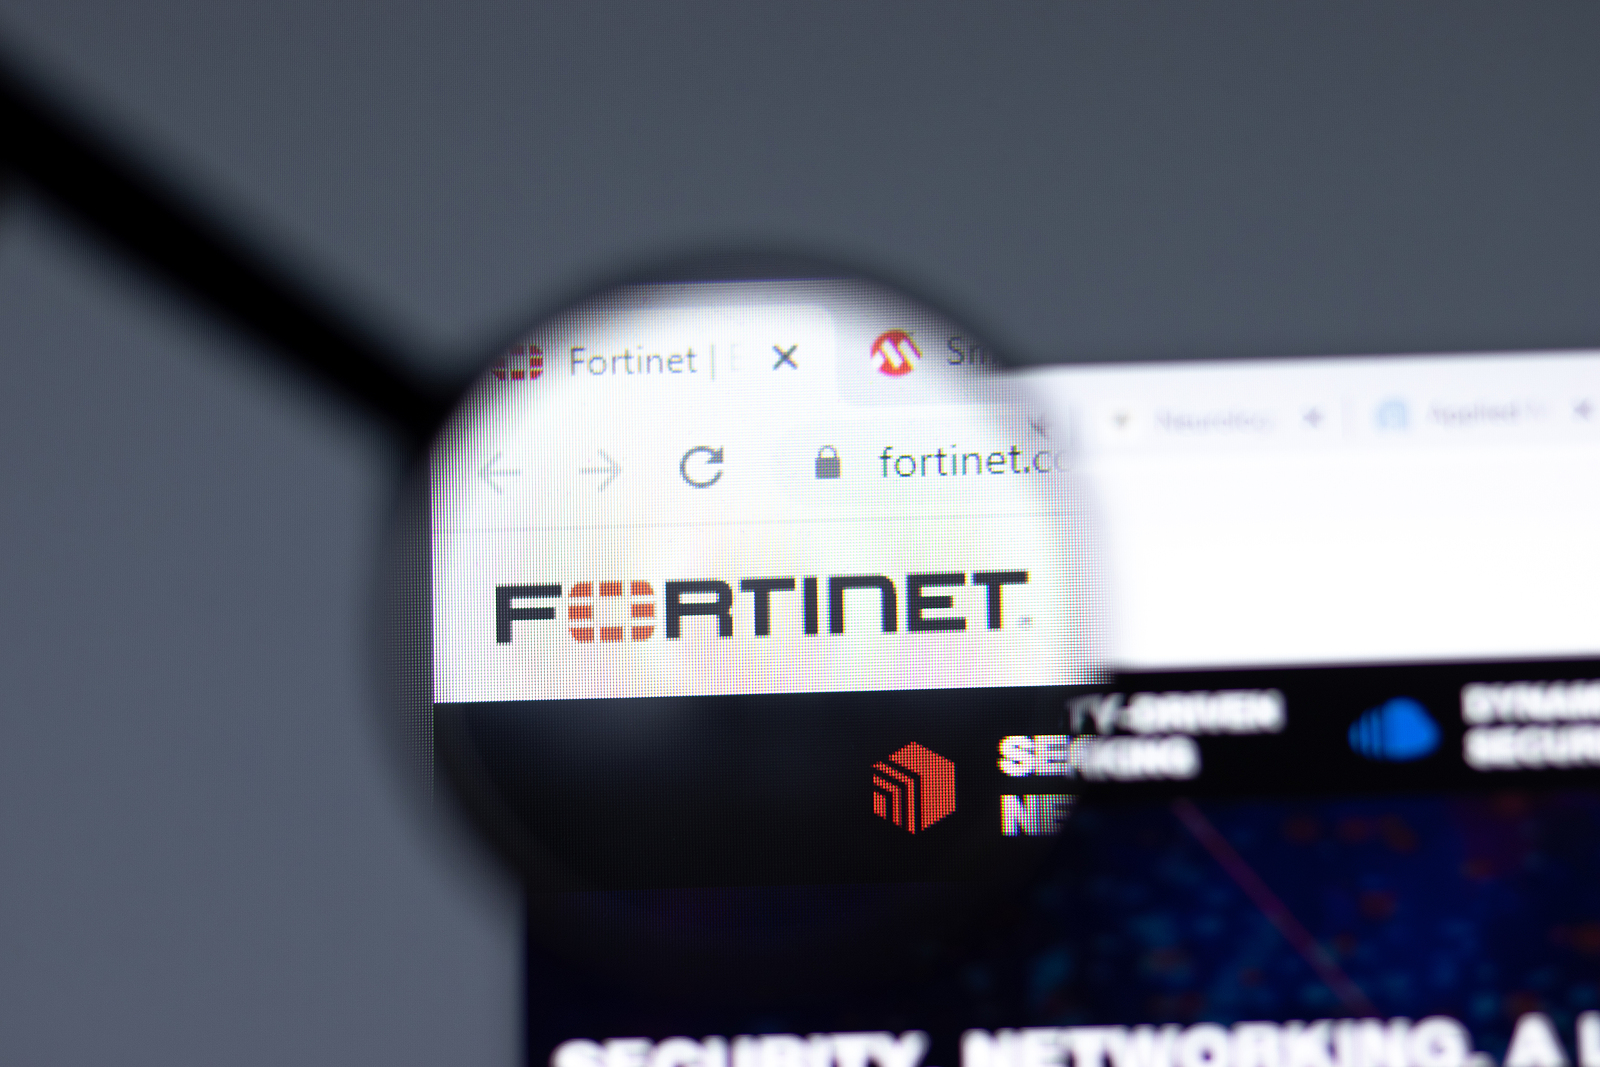 Fortinet Patches Critical RCE Flaw in FortiClientLinux, Urges Immediate Updates